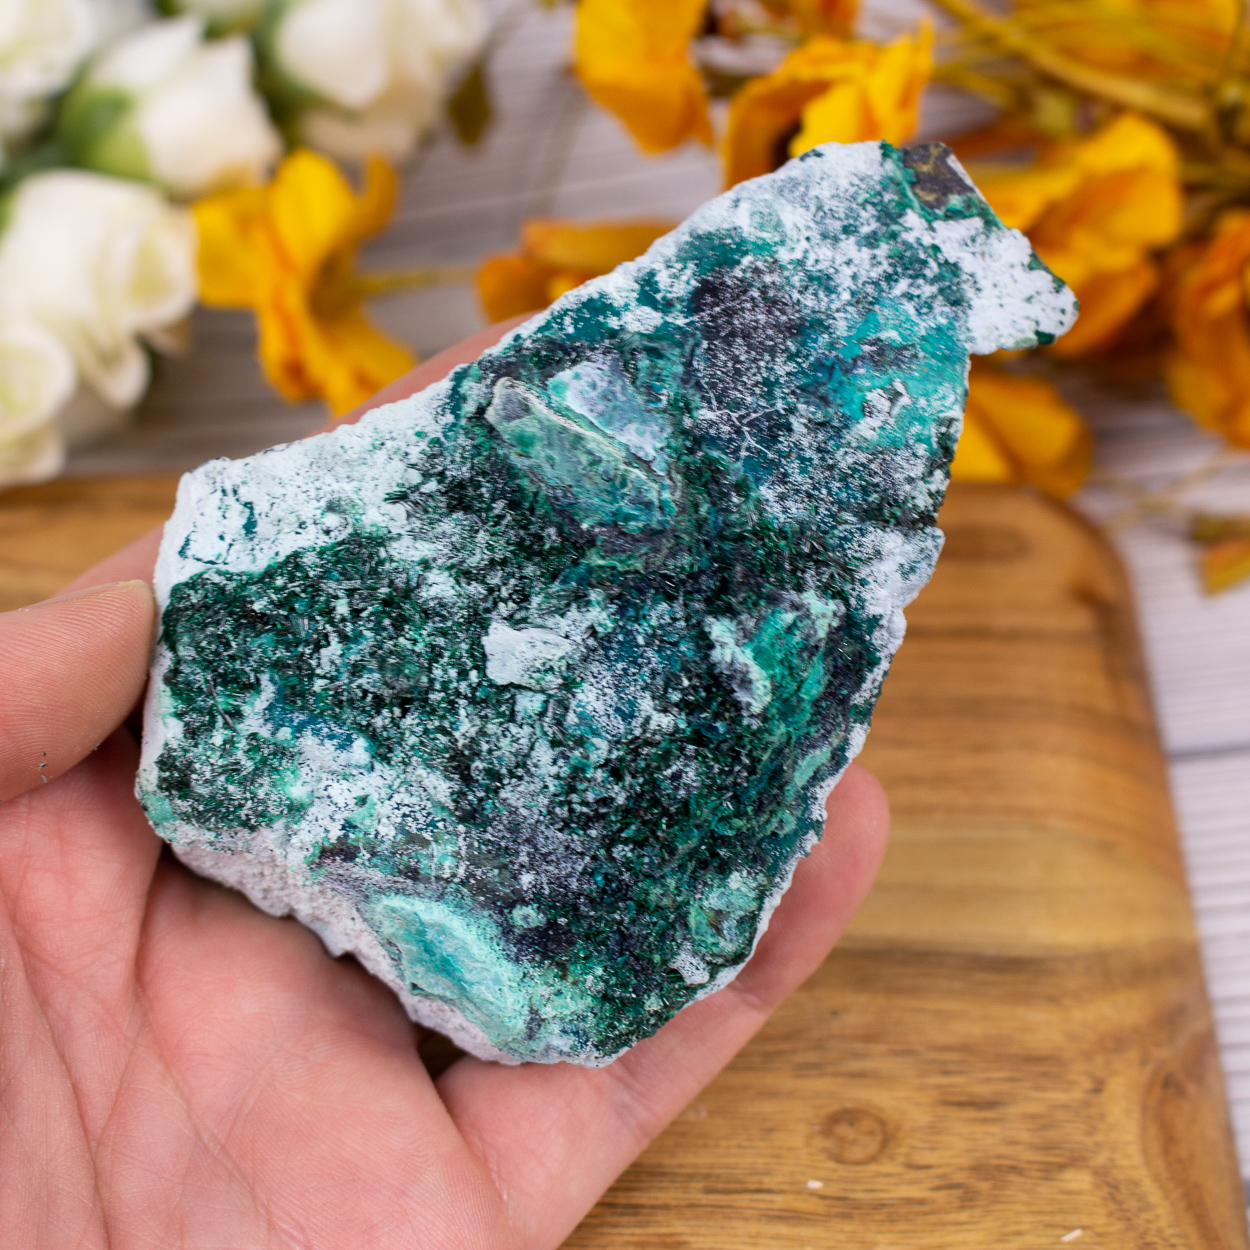 Crystallized Malachite on Chrysocolla #5 - The Crystal Council